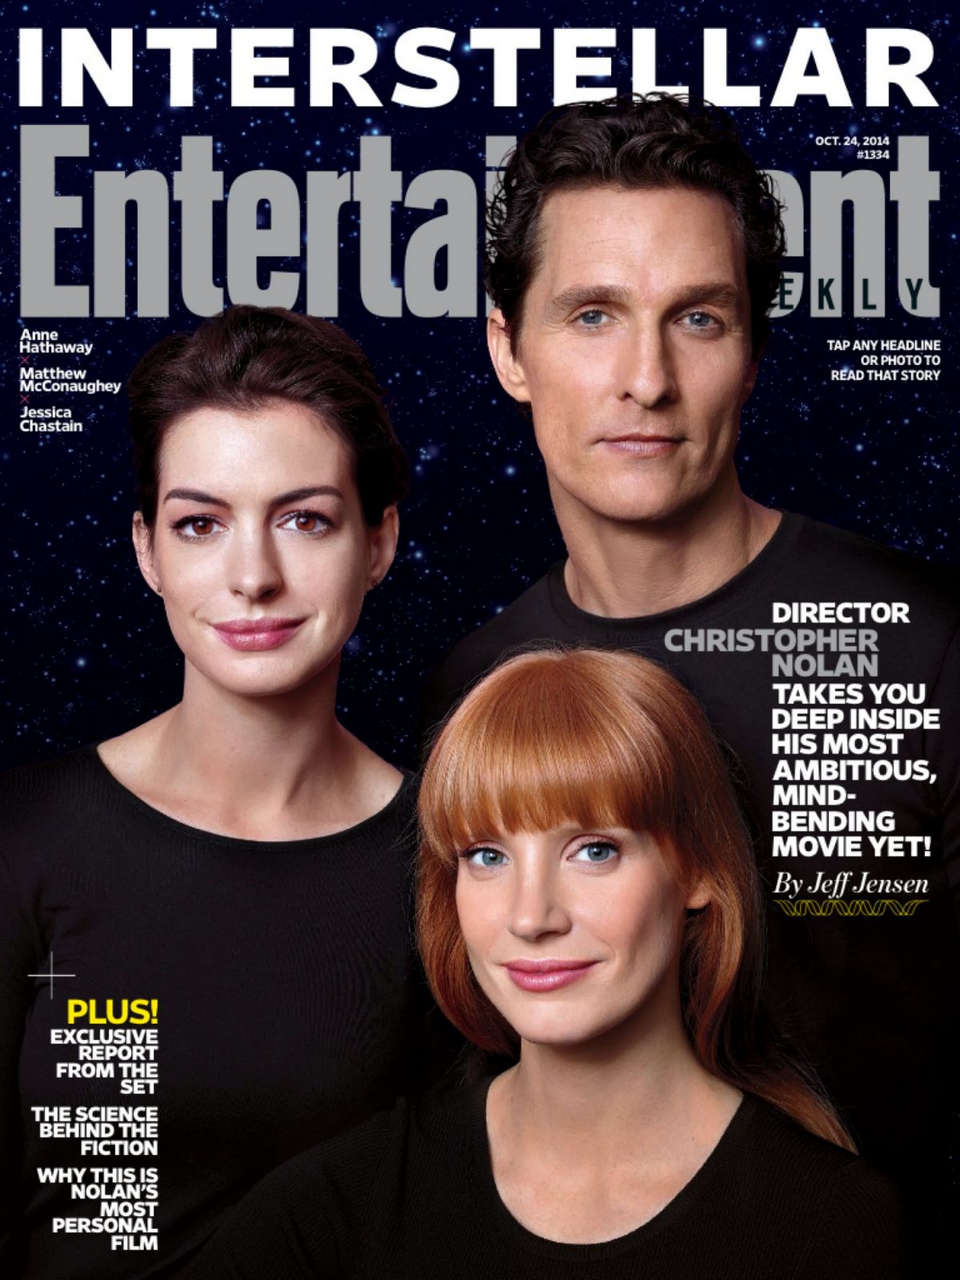 Anne Hathaway Jessica Chastain Entertainment Weekly Magazine October 2014 Issue